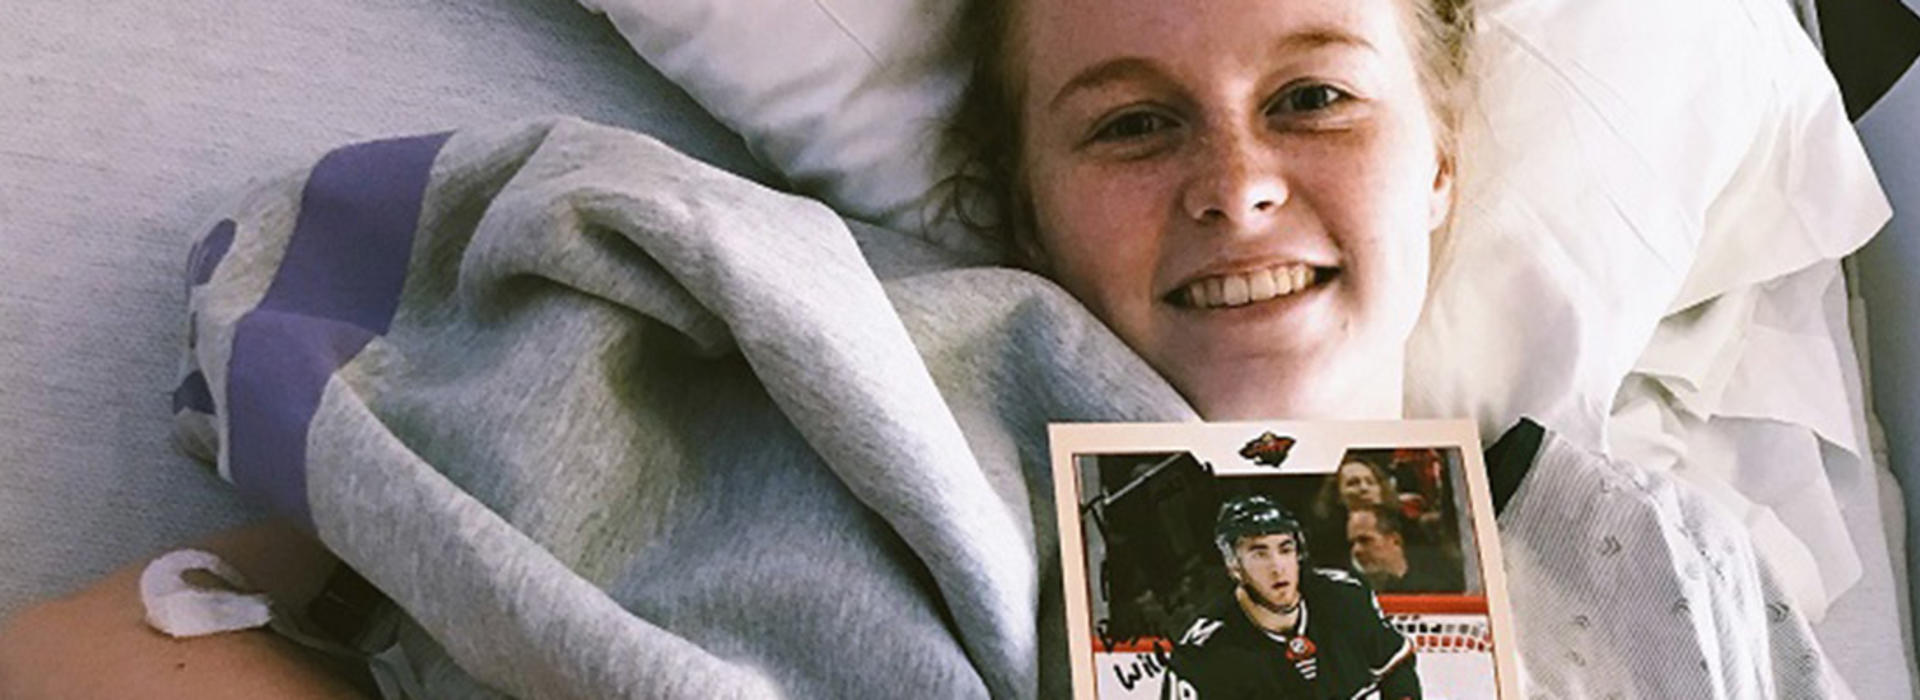 Cassidy Clifton in hospital bed